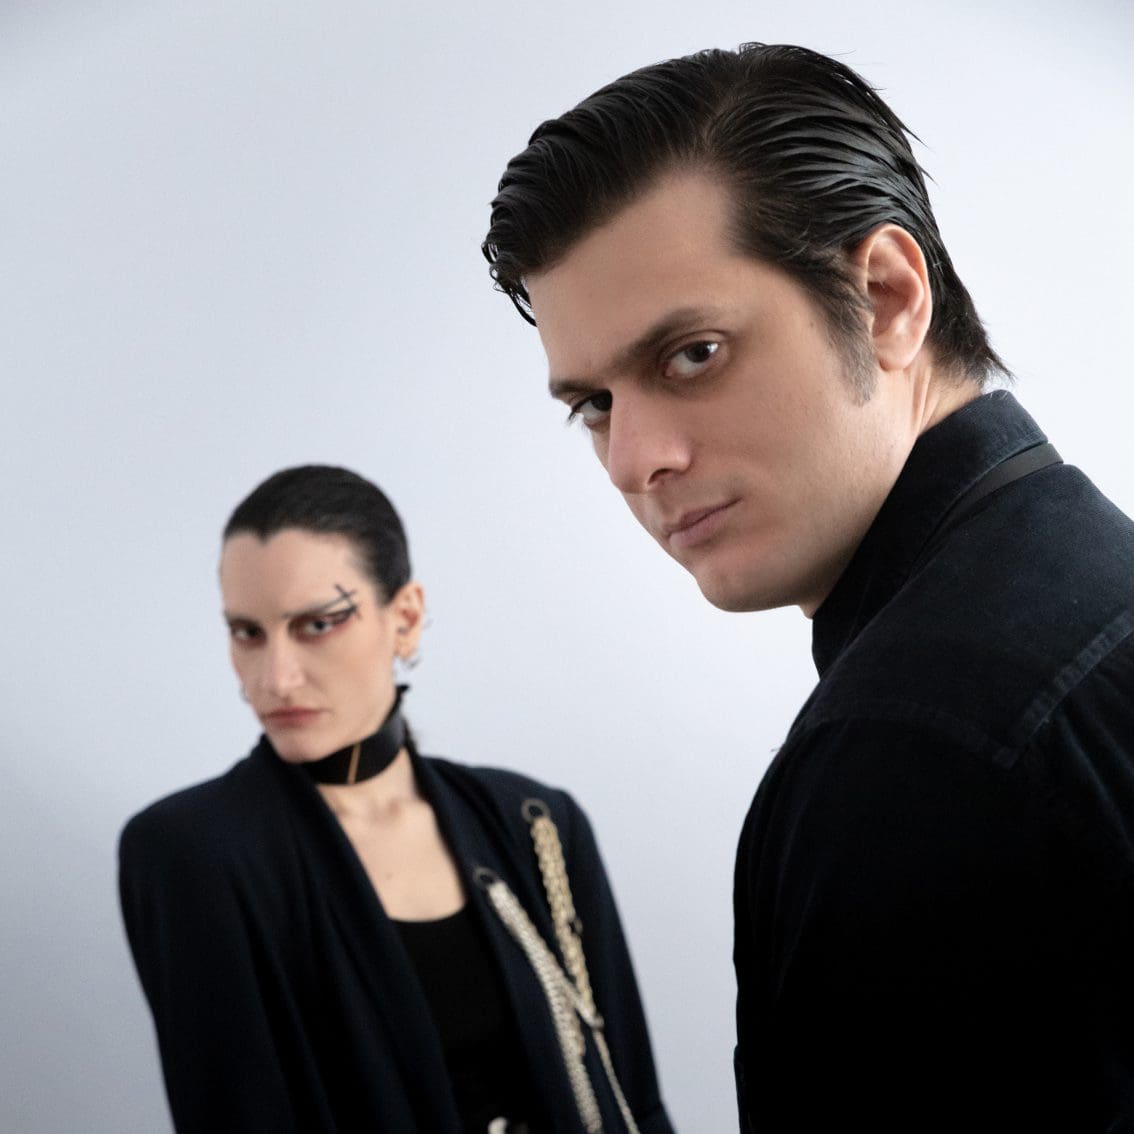 Greek goth synth duo Strawberry Pills to release debut album, lead single/video available now